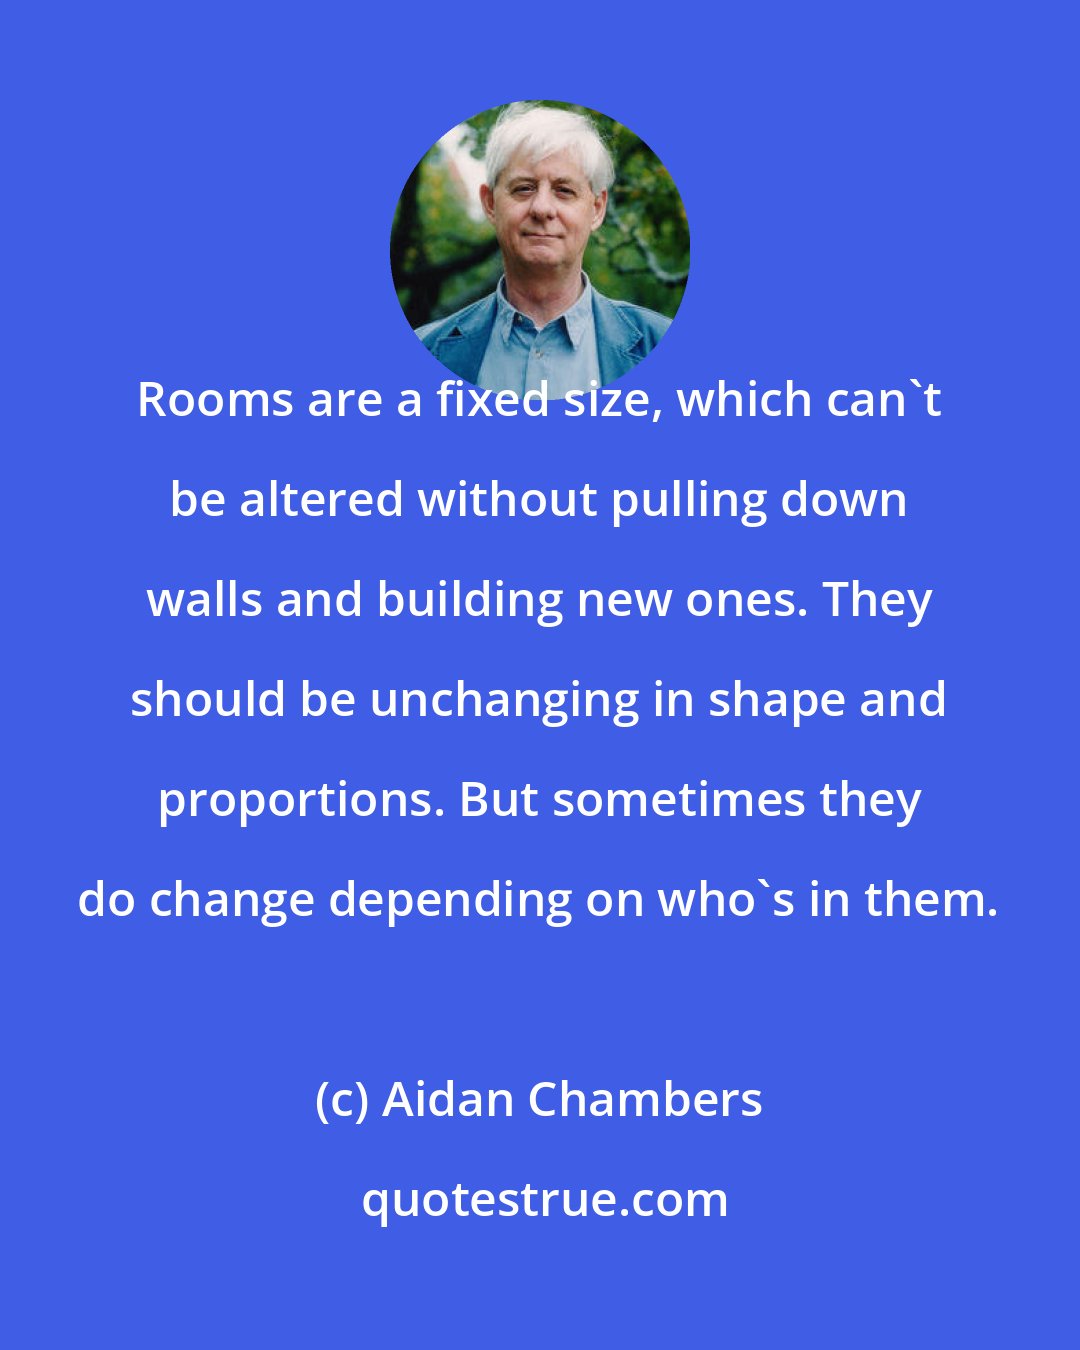 Aidan Chambers: Rooms are a fixed size, which can't be altered without pulling down walls and building new ones. They should be unchanging in shape and proportions. But sometimes they do change depending on who's in them.